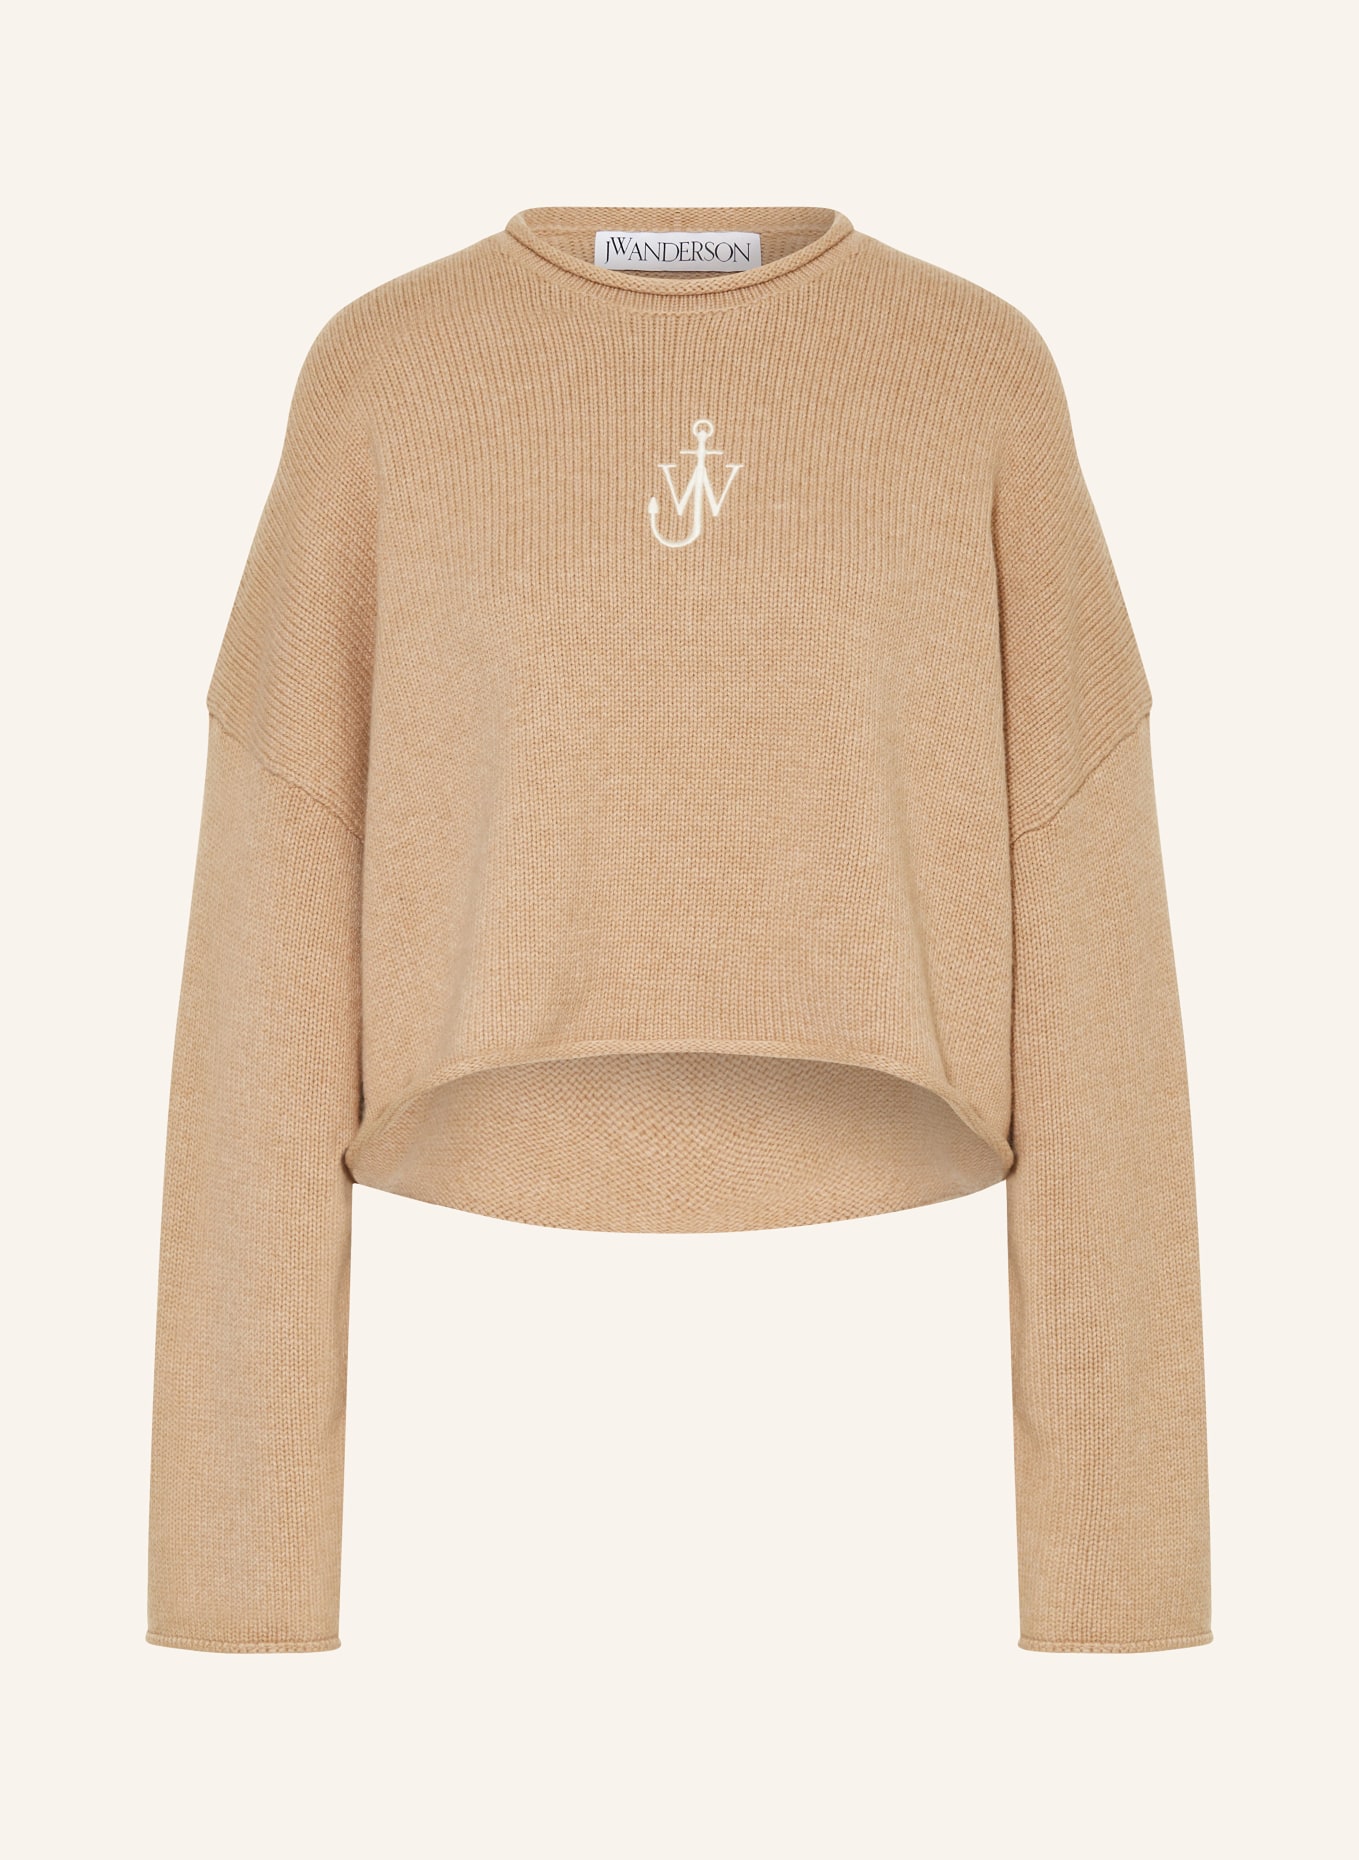 JW ANDERSON Cropped sweater, Color: BEIGE (Image 1)